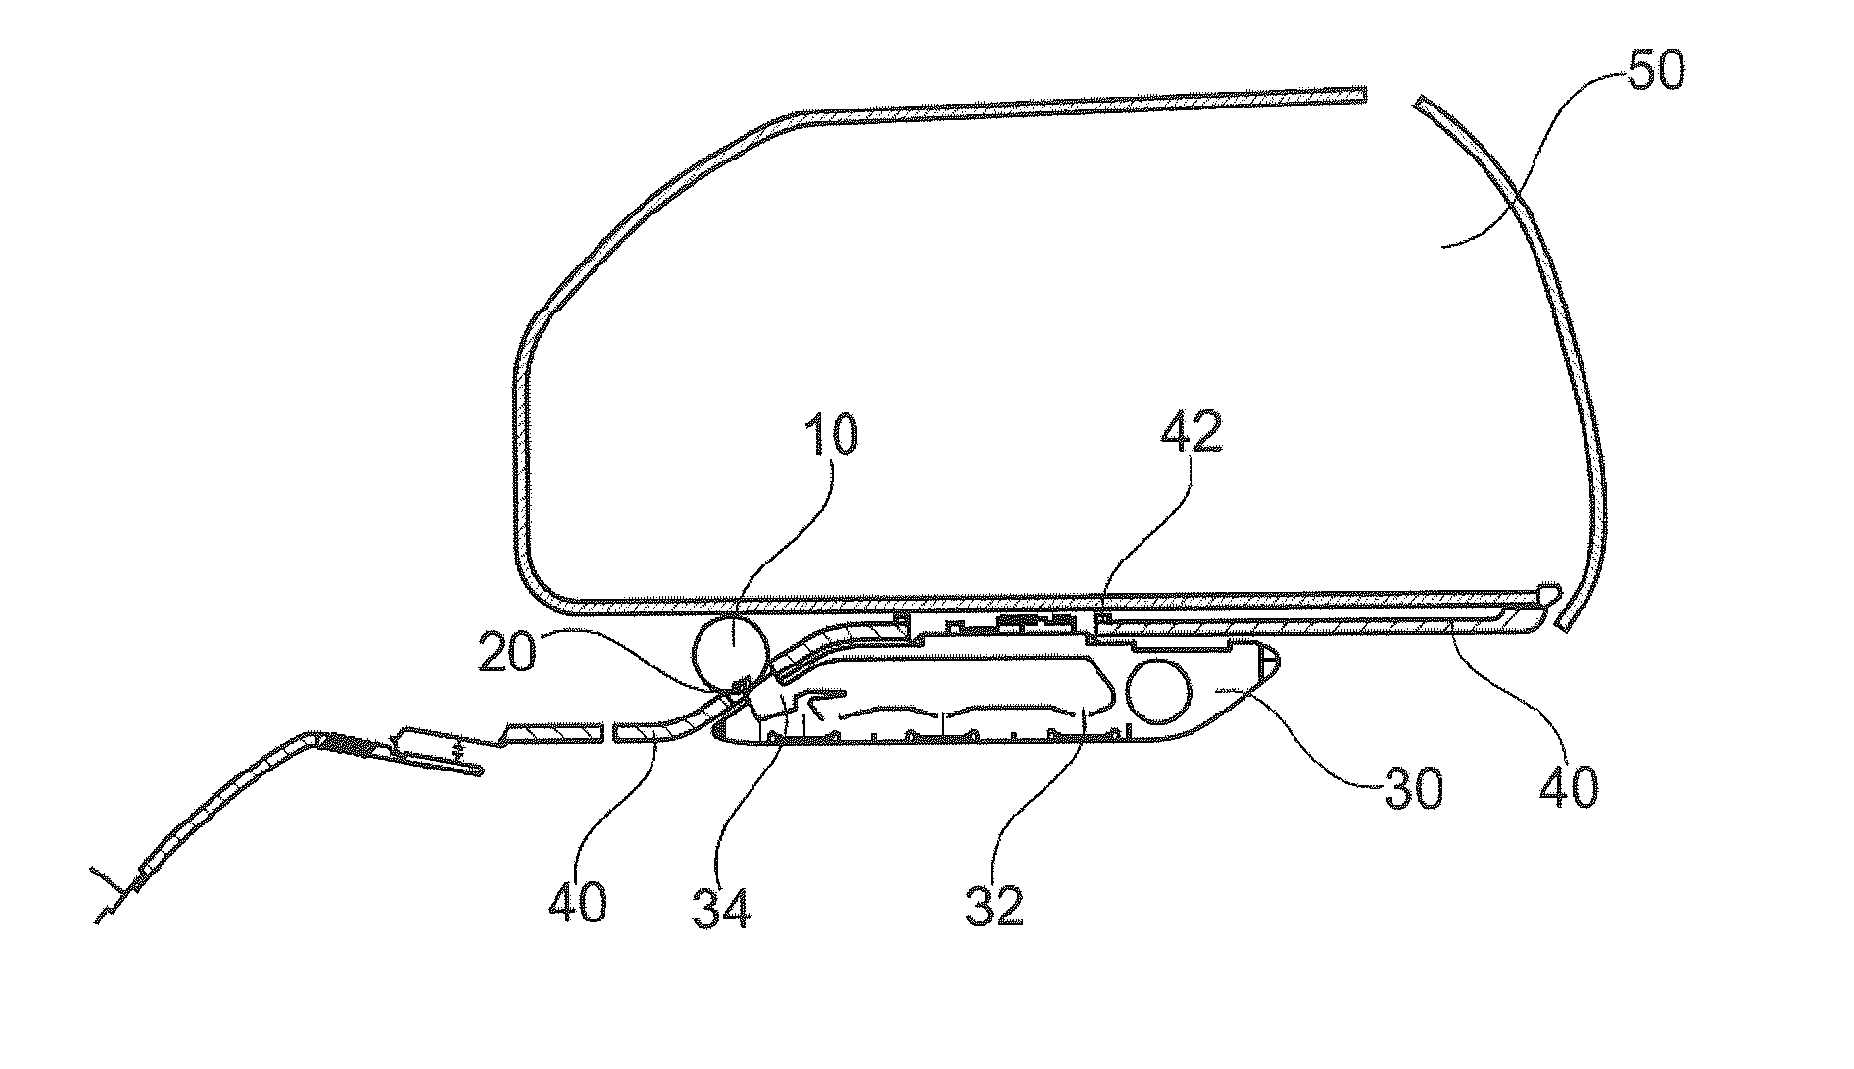 Air Transmission System for Flexible Passenger Supply Units